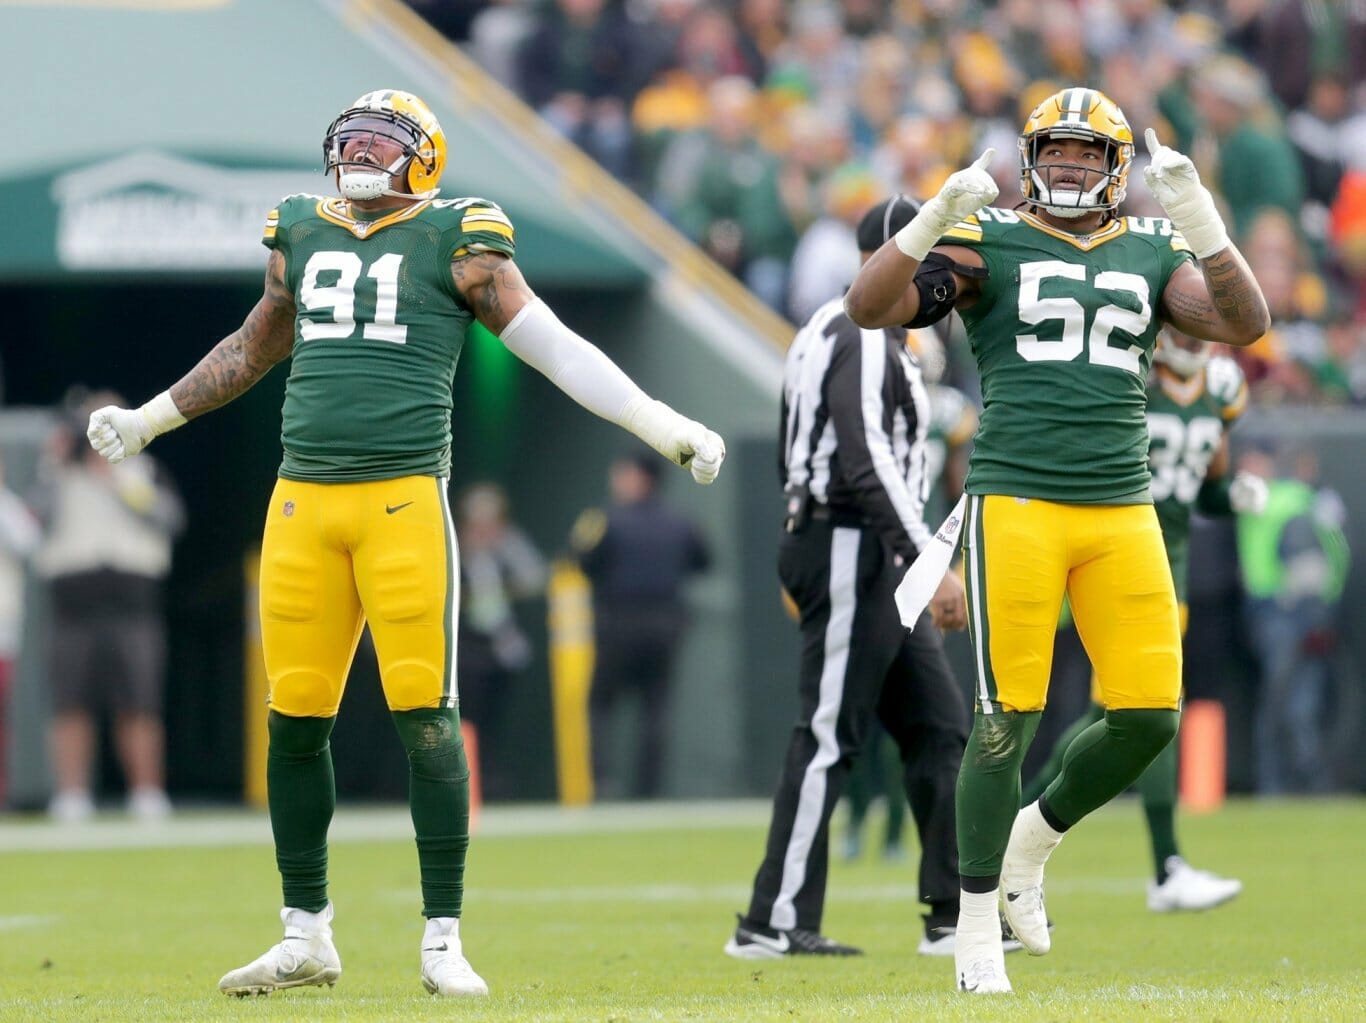 3 Pass Rushers that could help the Packers